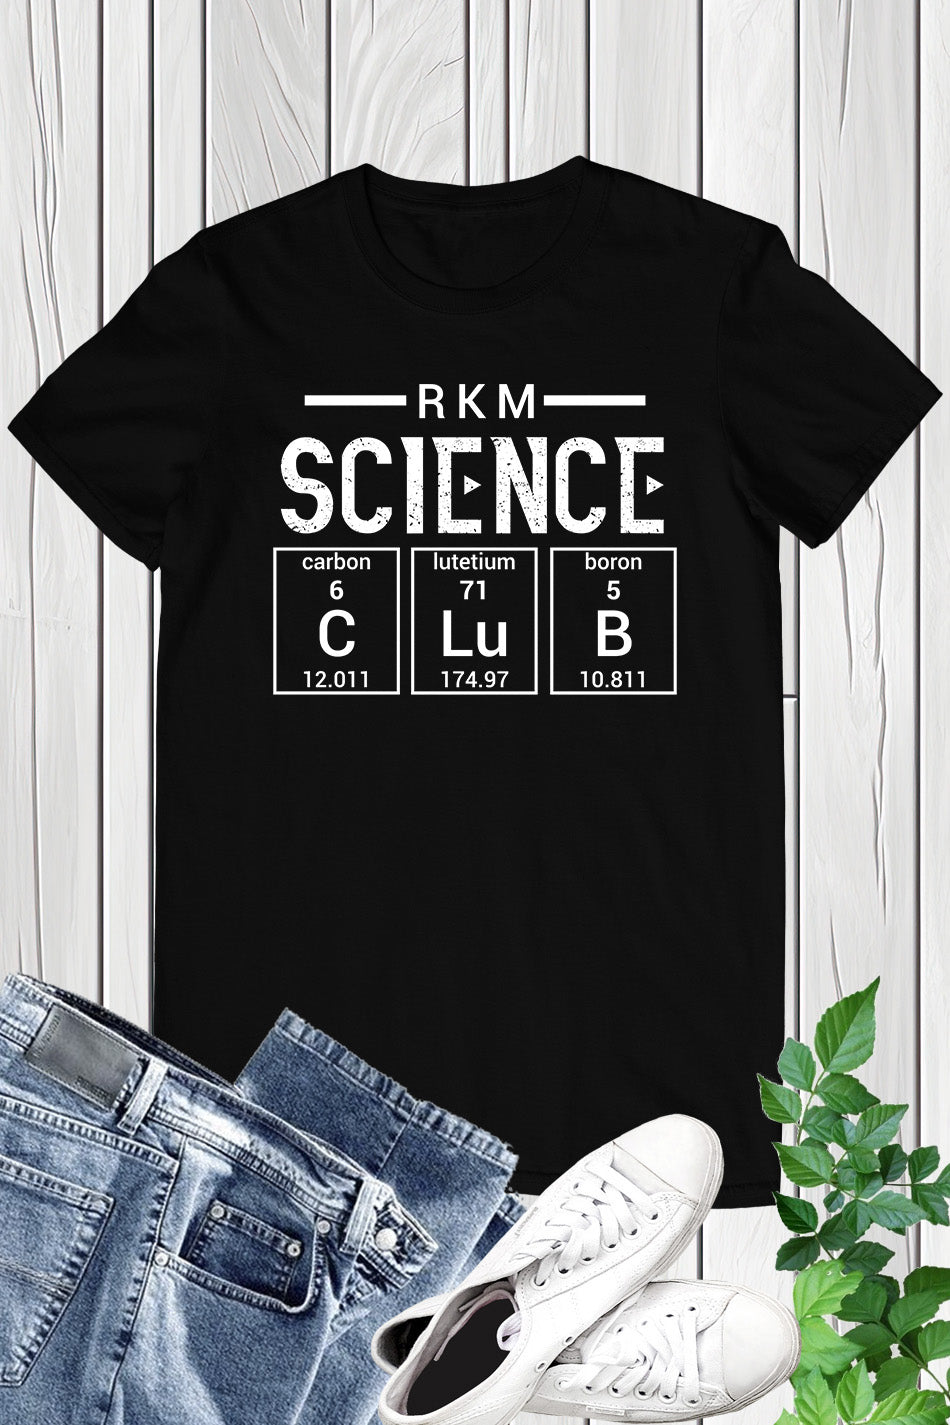 Science Club Personalized T Shirt